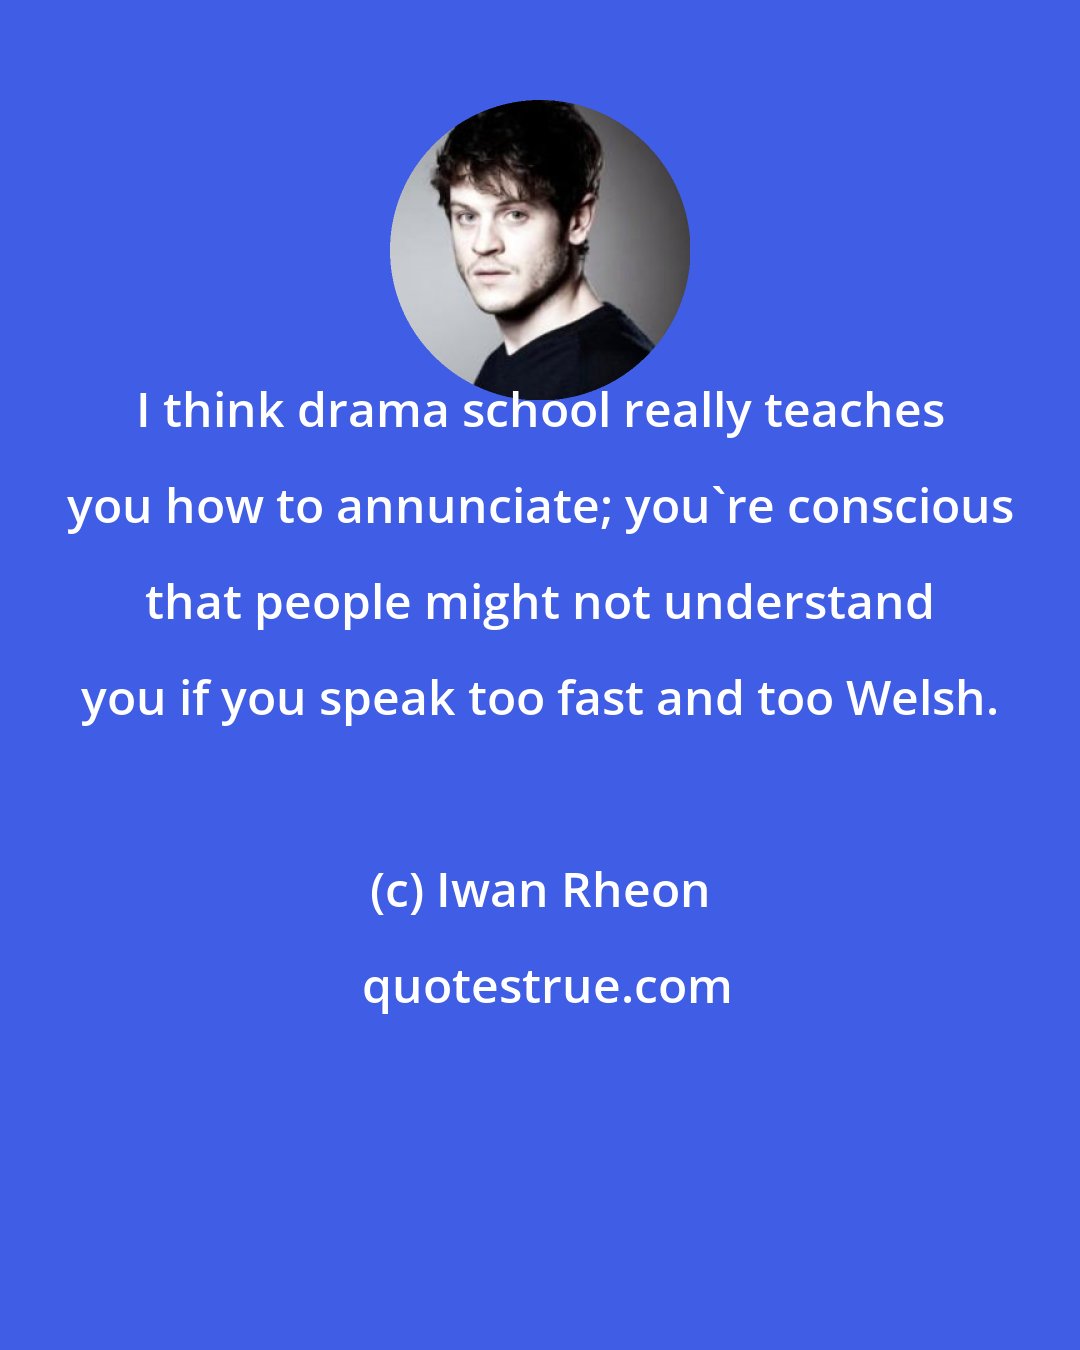 Iwan Rheon: I think drama school really teaches you how to annunciate; you're conscious that people might not understand you if you speak too fast and too Welsh.